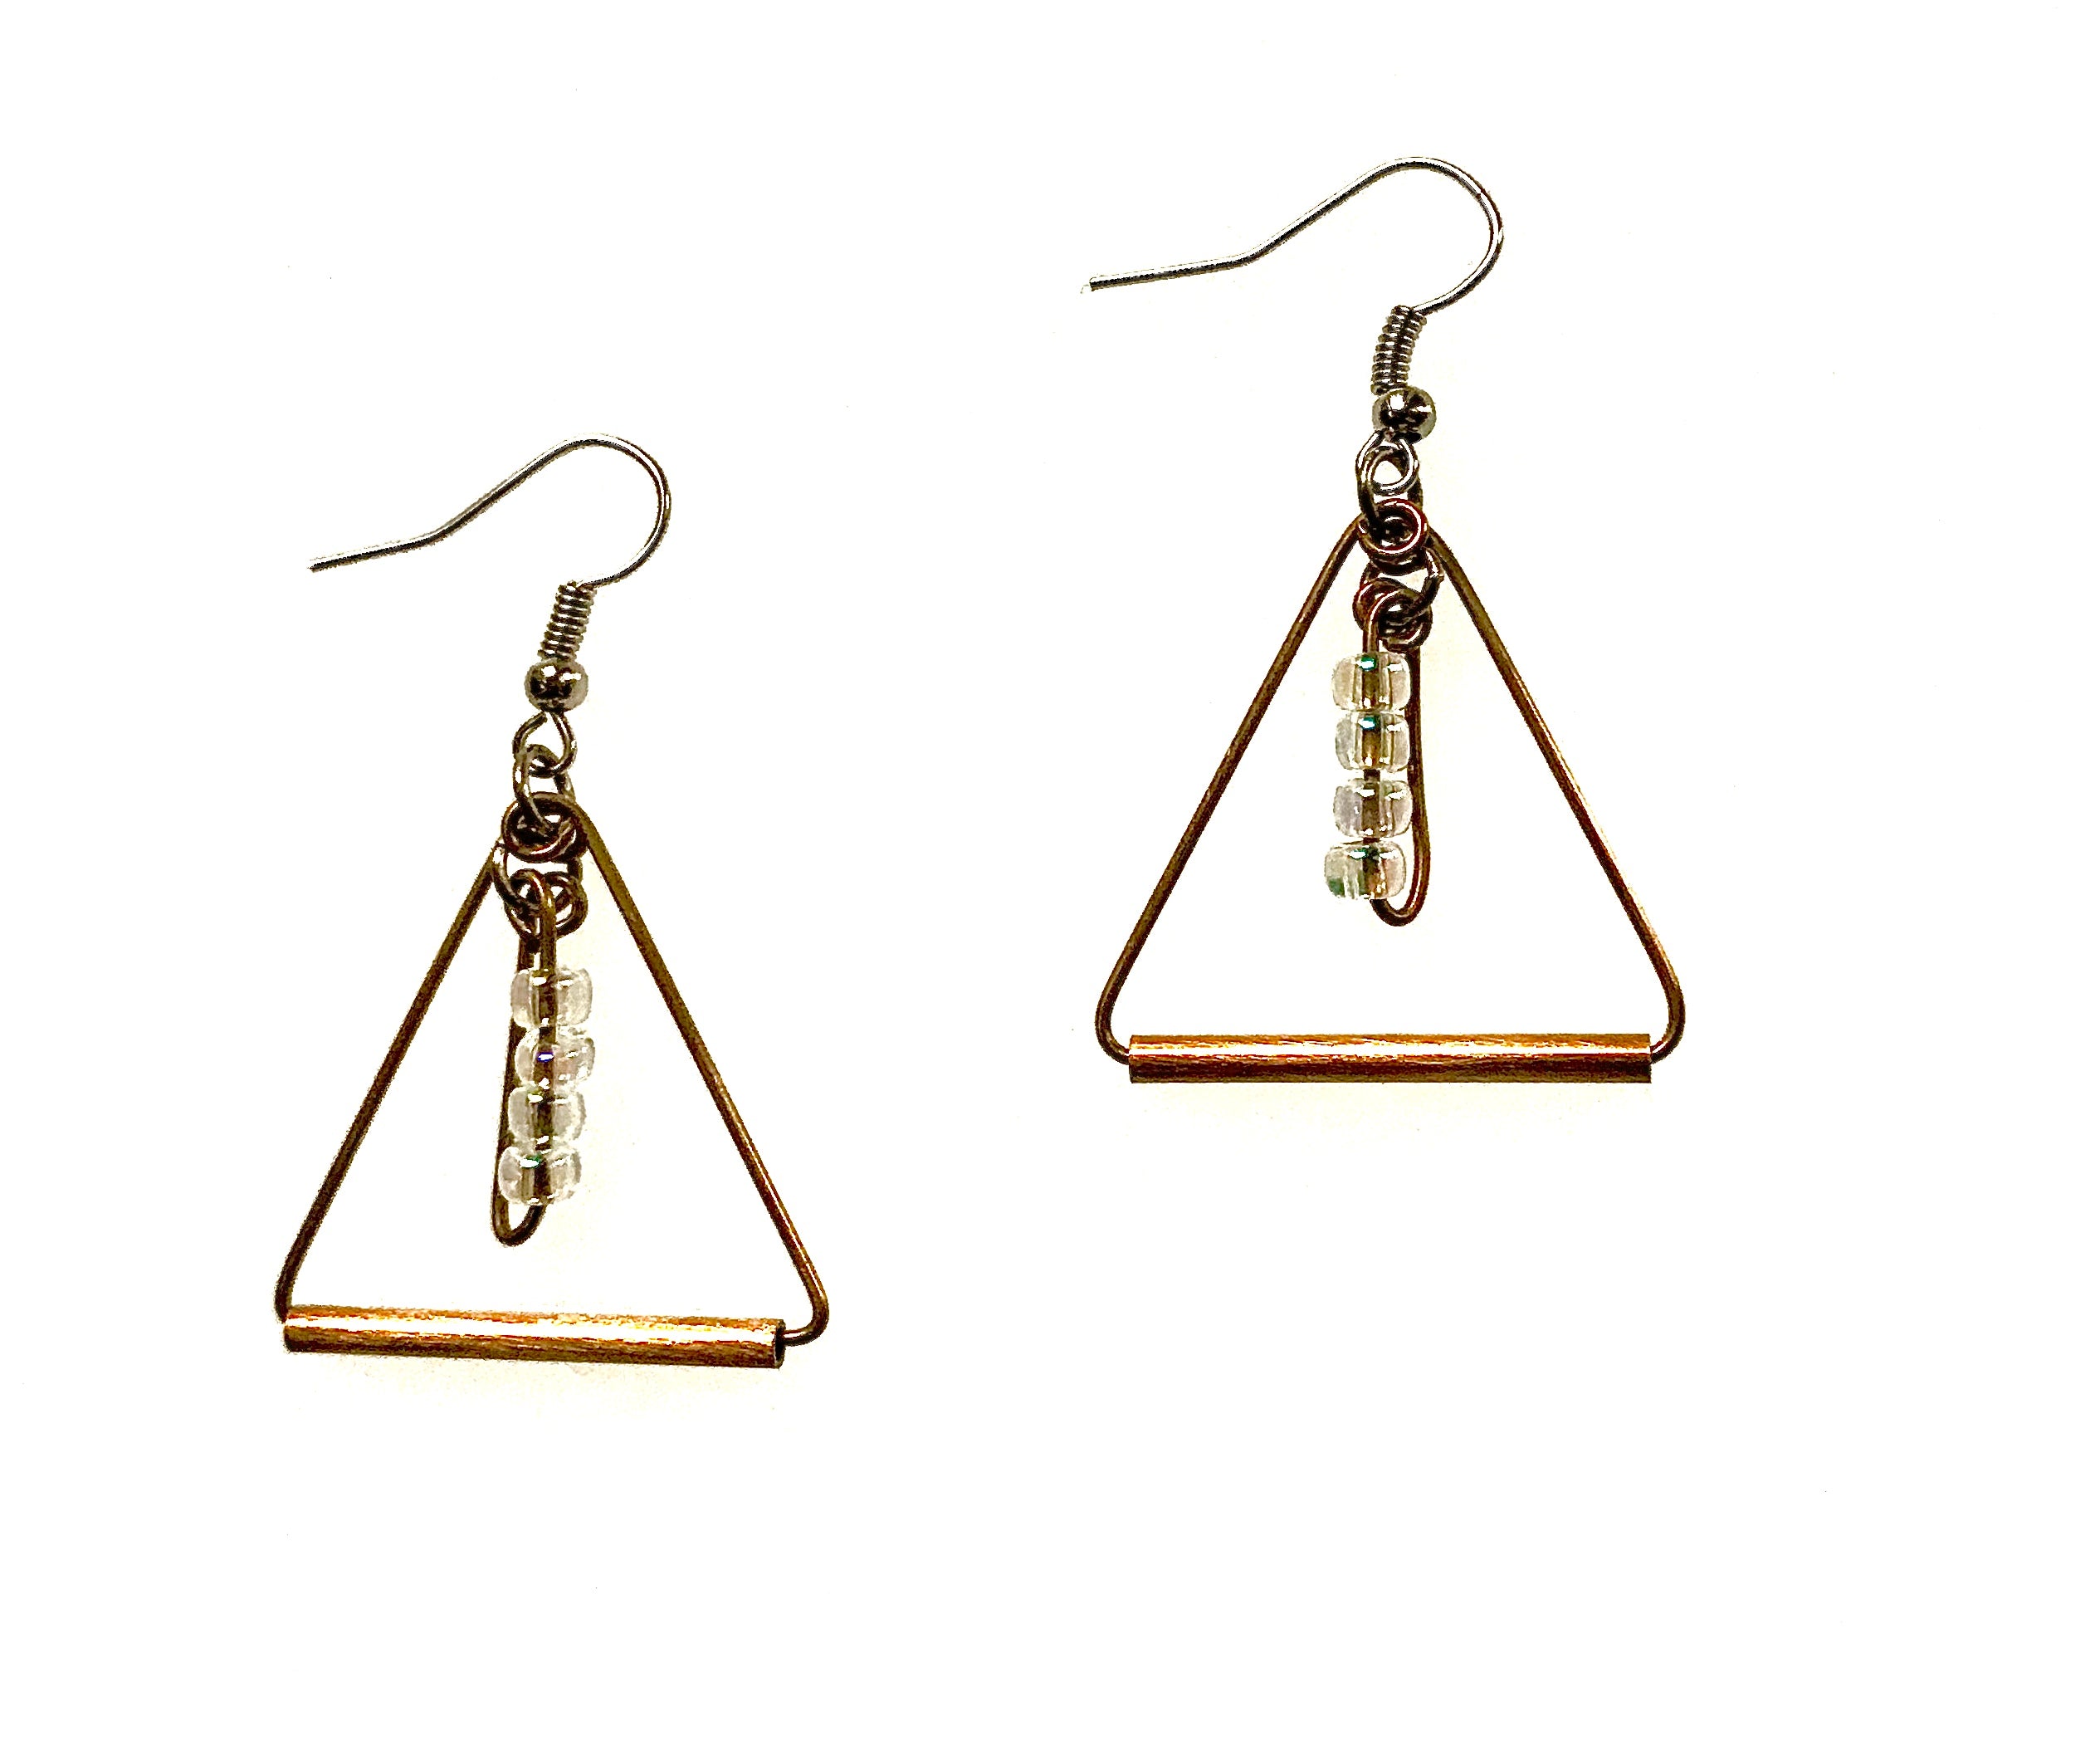 A pair of triangle-shaped brass earrings with clear seed beads dangling in center. Earrings have earwires.